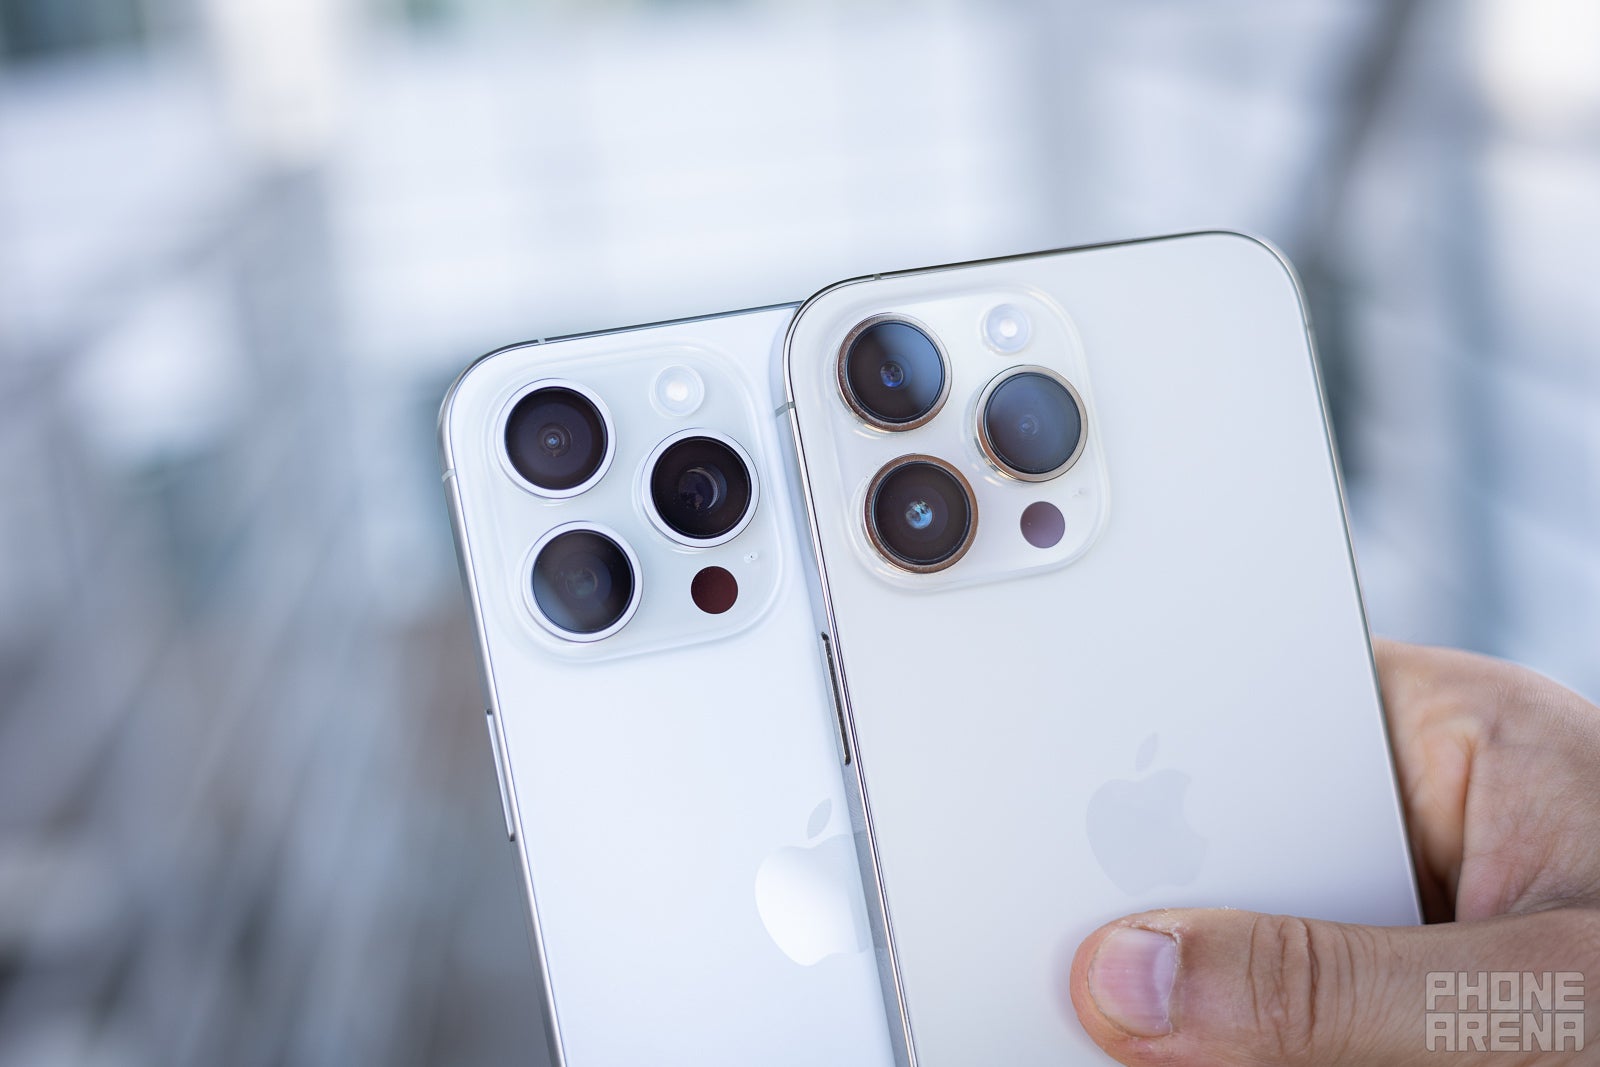 Apple iPhone 14 Pro vs iPhone 14: one is new, the other is not - PhoneArena